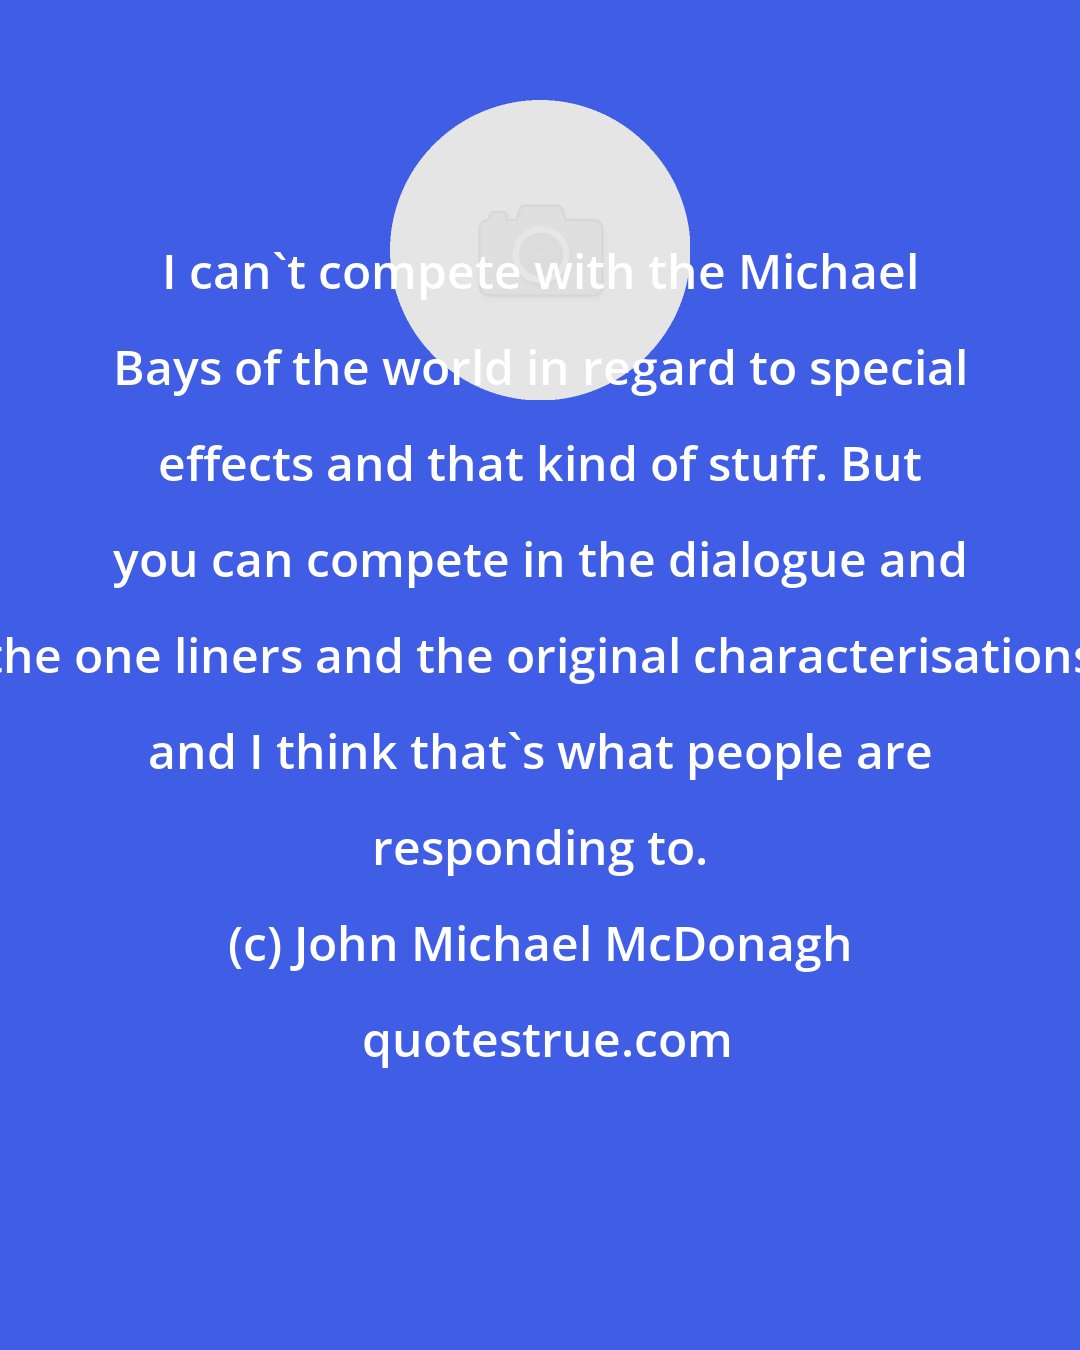 John Michael McDonagh: I can't compete with the Michael Bays of the world in regard to special effects and that kind of stuff. But you can compete in the dialogue and the one liners and the original characterisations and I think that's what people are responding to.